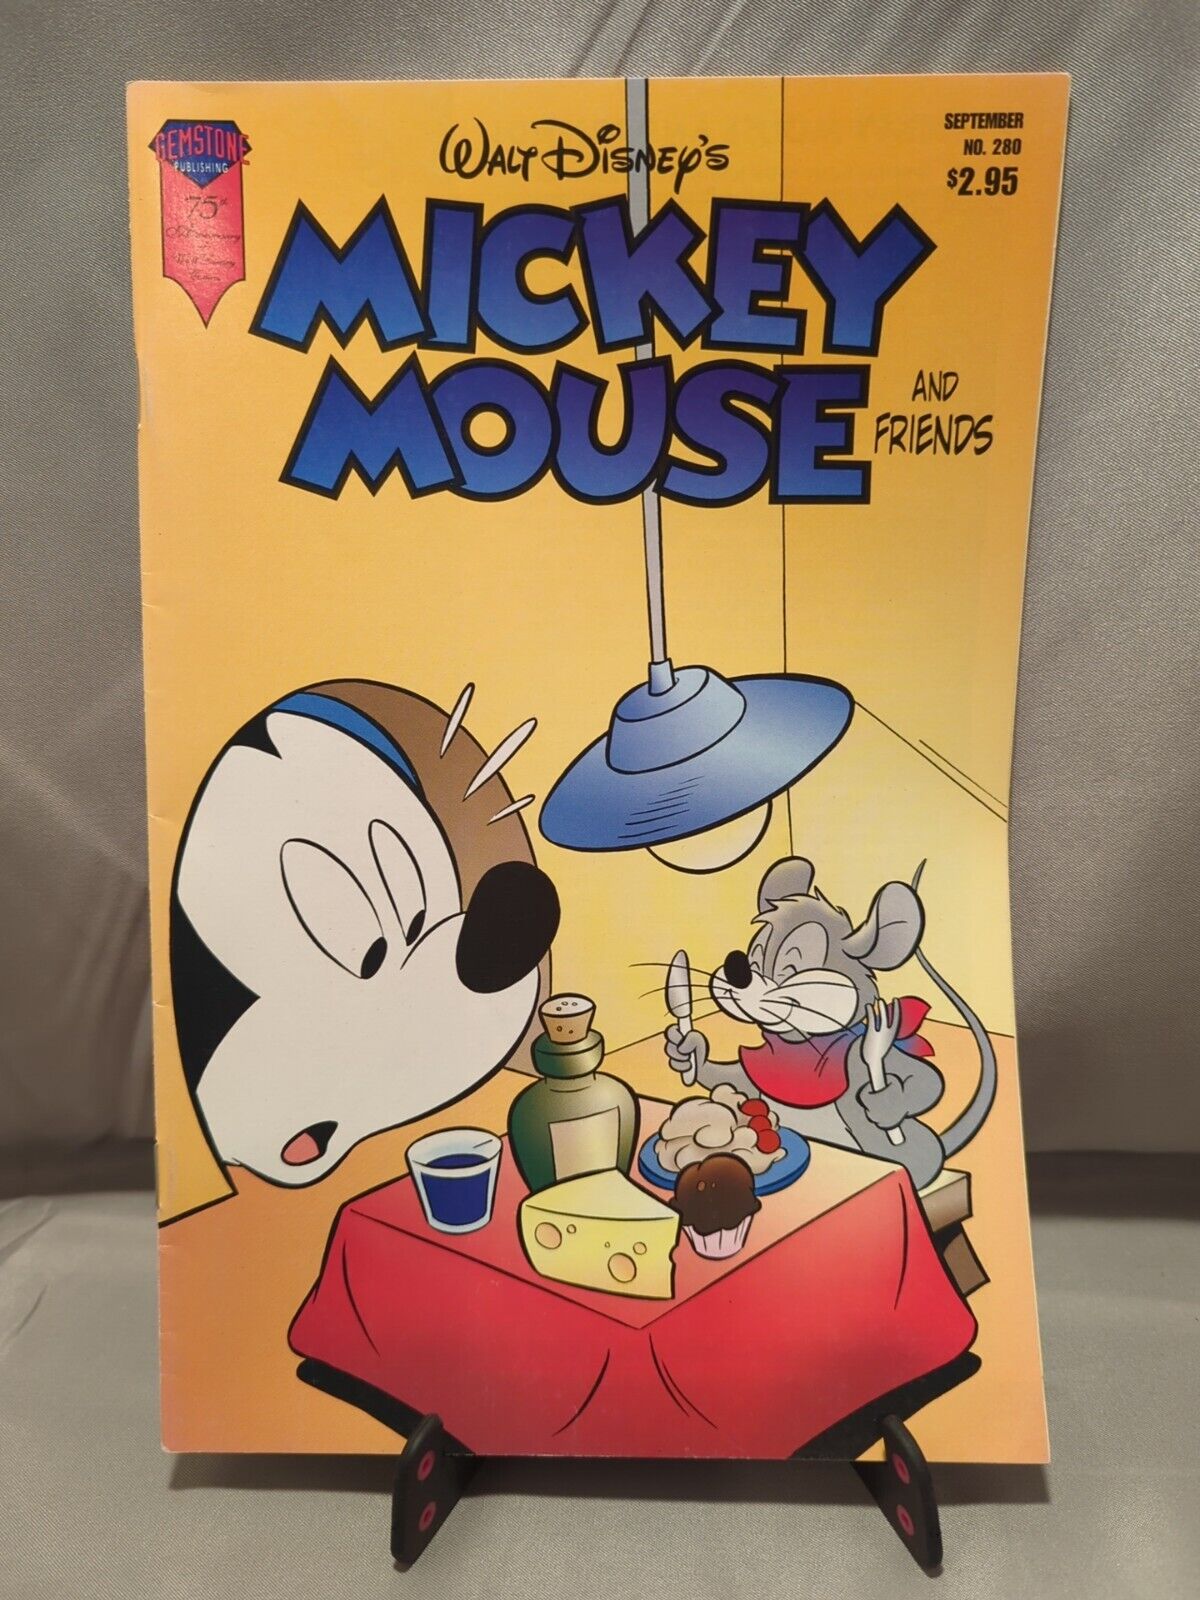 Mickey Mouse and Friends #280 VF 2005 